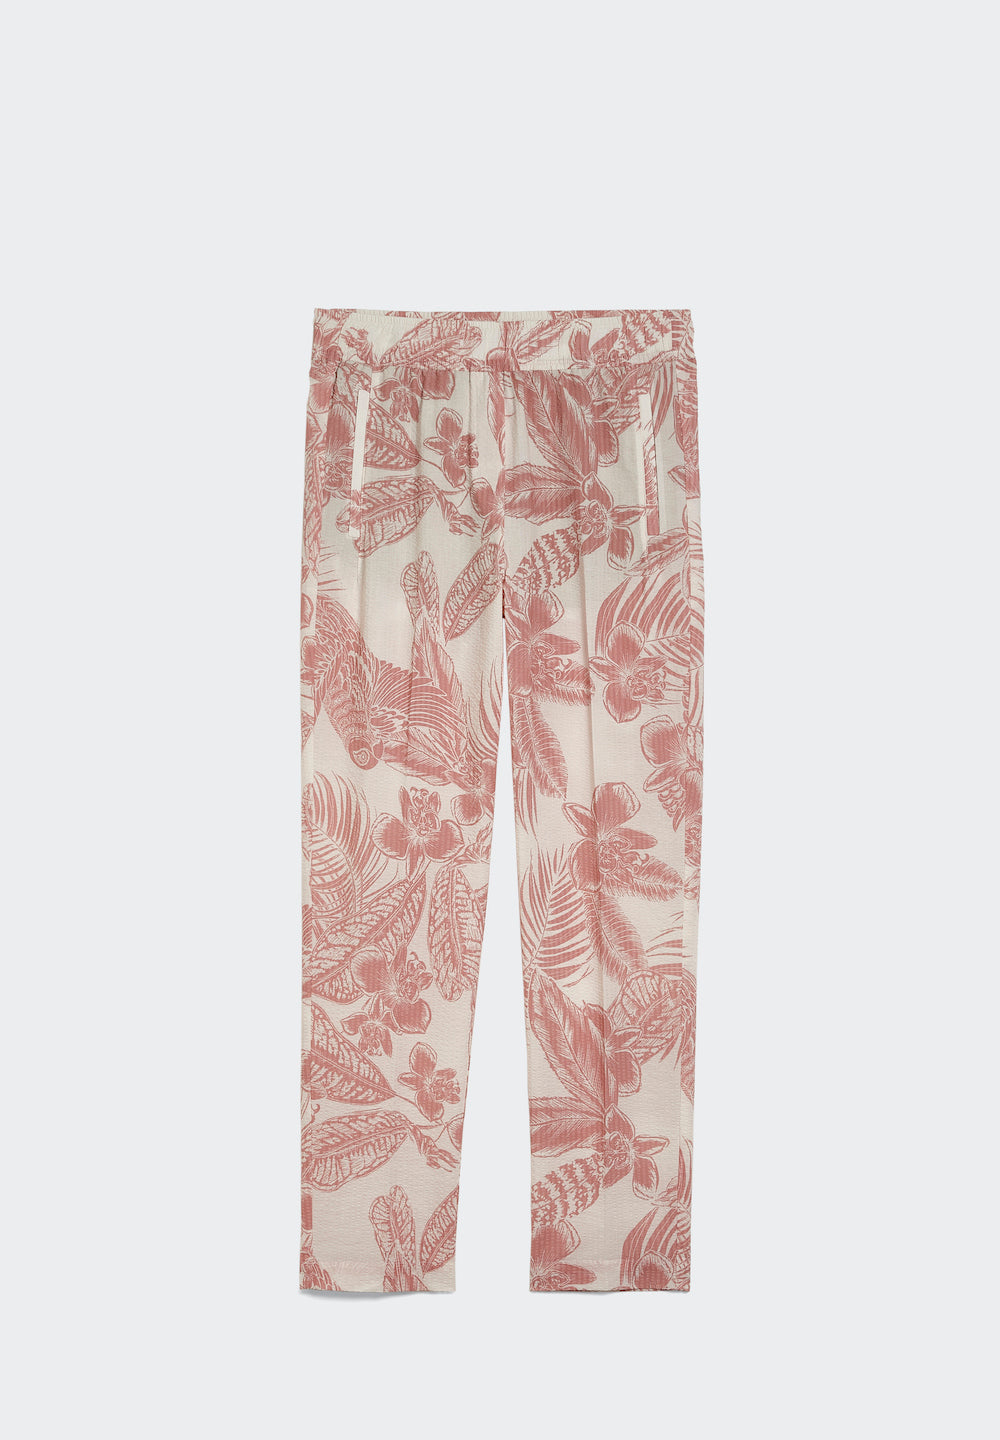 Printed Cotton Lille Slipover Pants with Welt Pockets